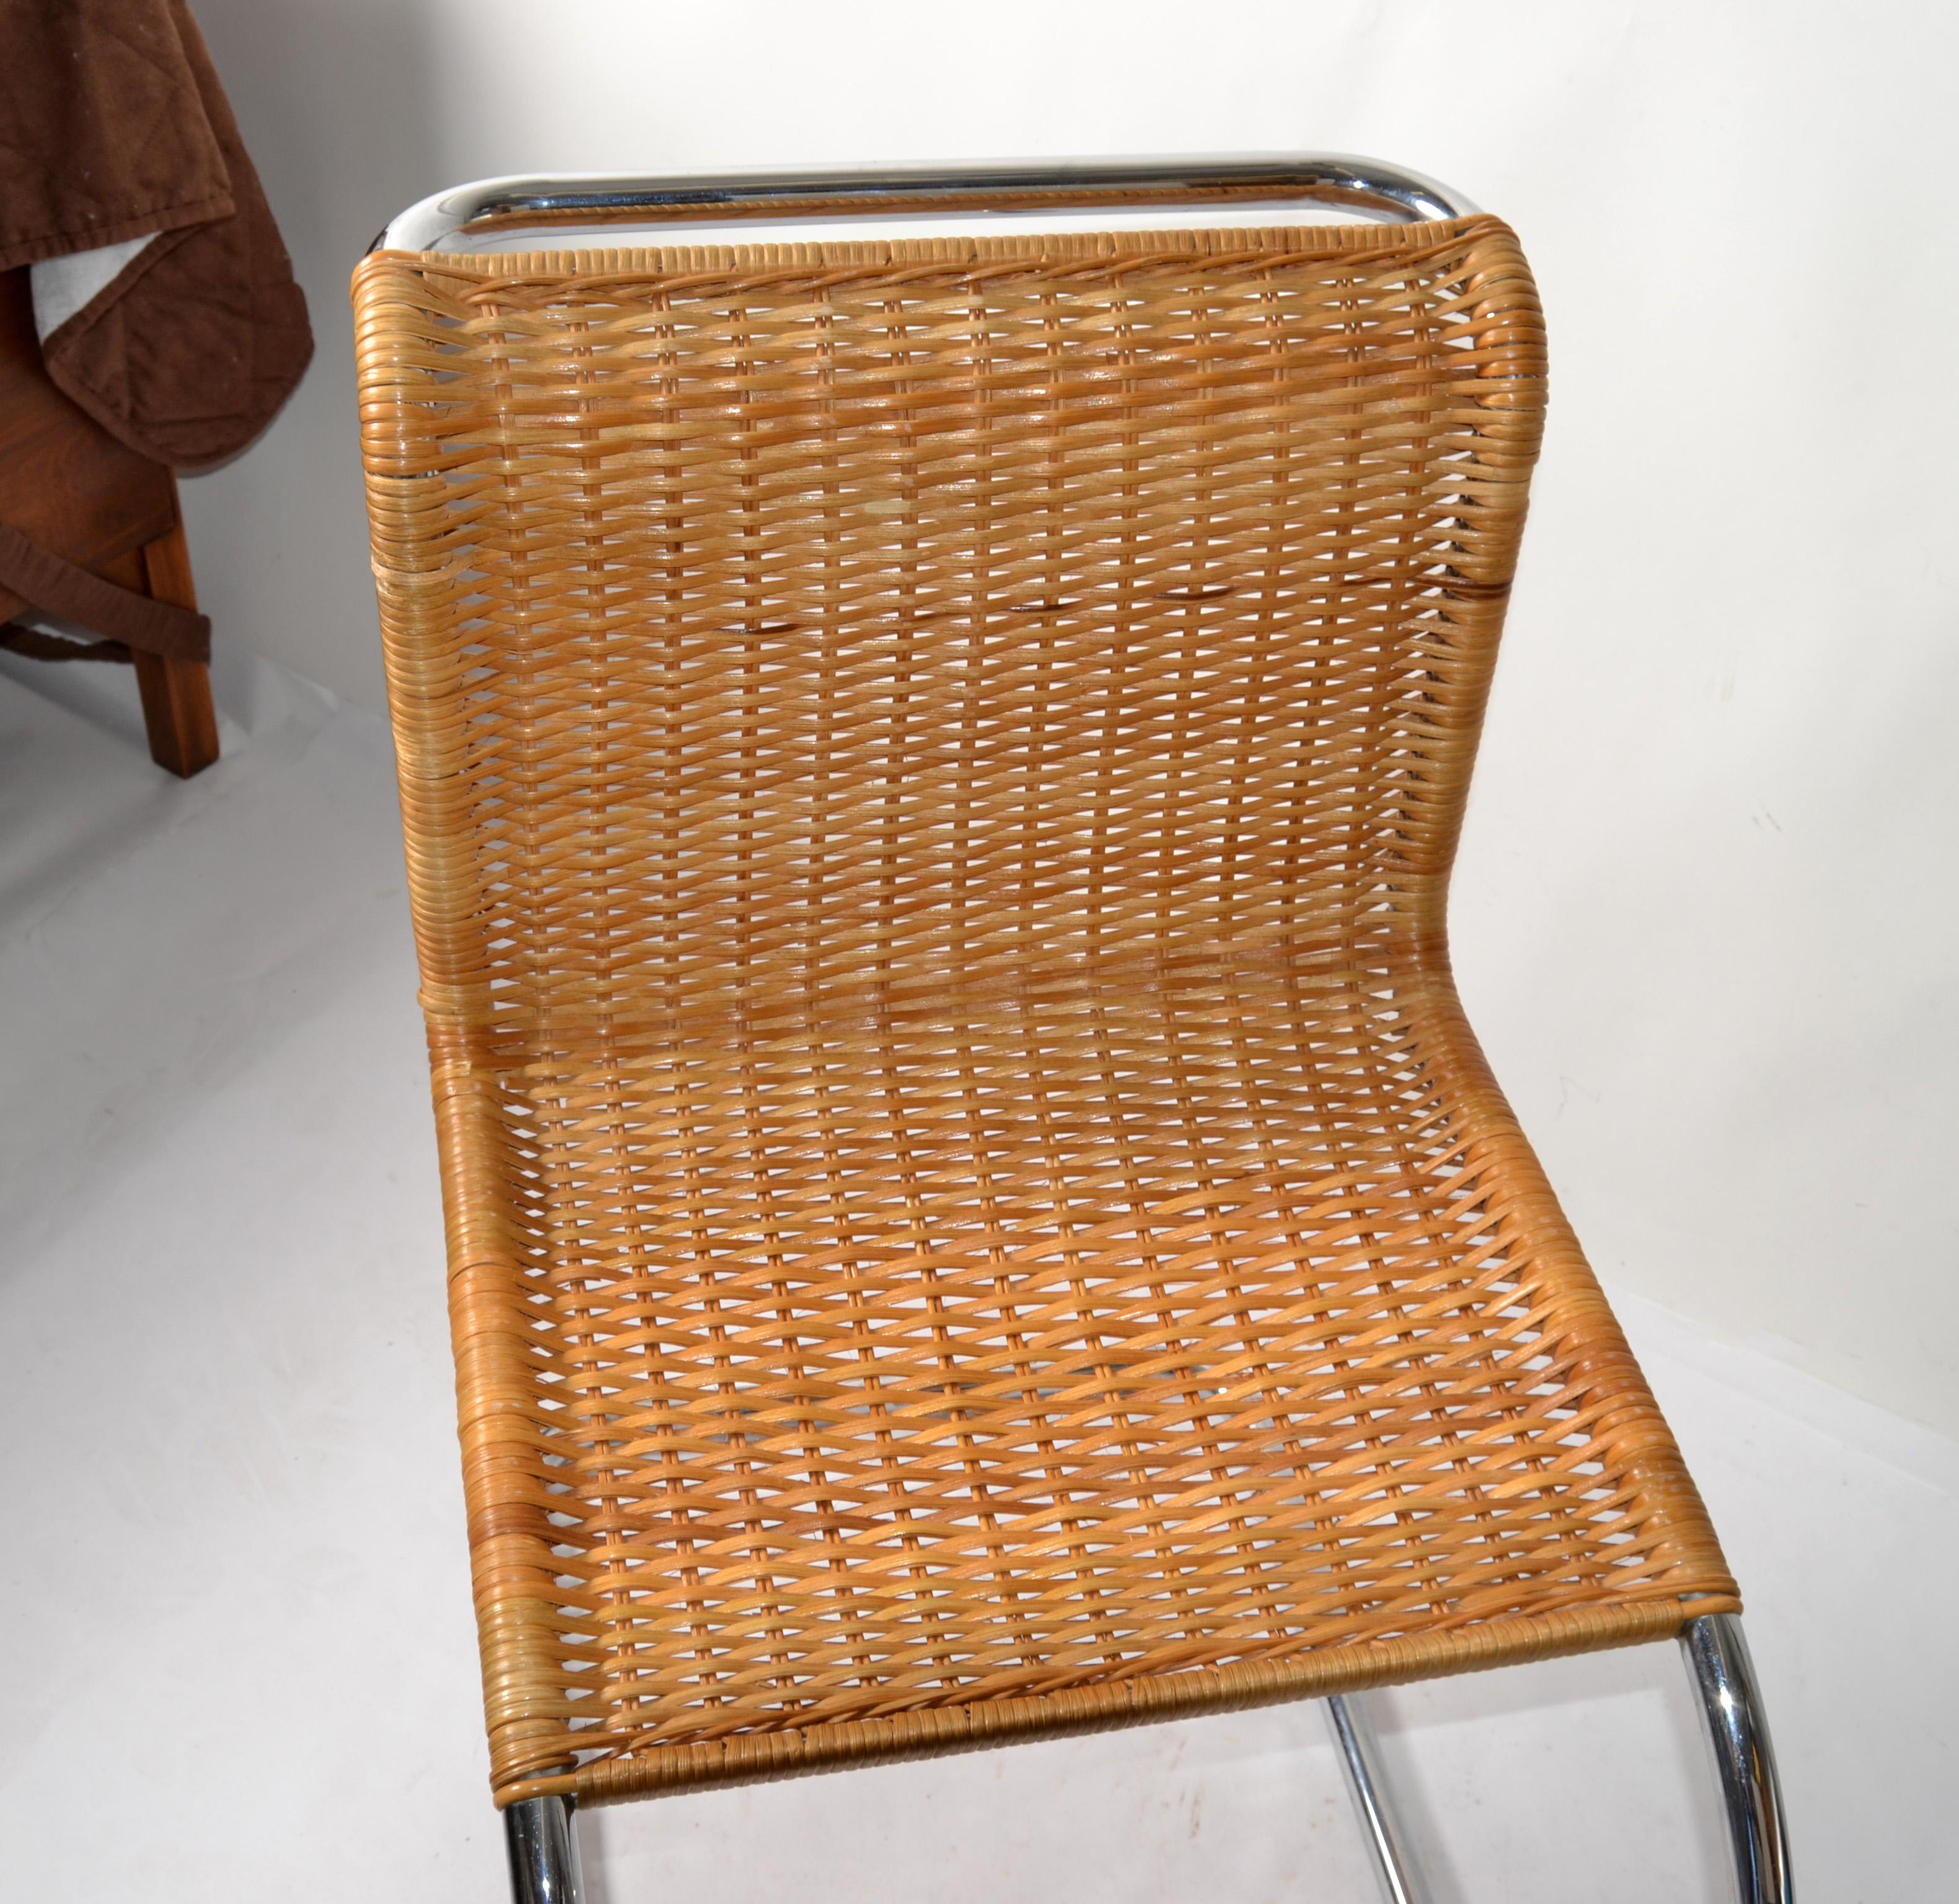 Polished Tubular Ludwig Mies van der Rohe Attributed Mr Chair Armless Woven Cane Seat 70s For Sale